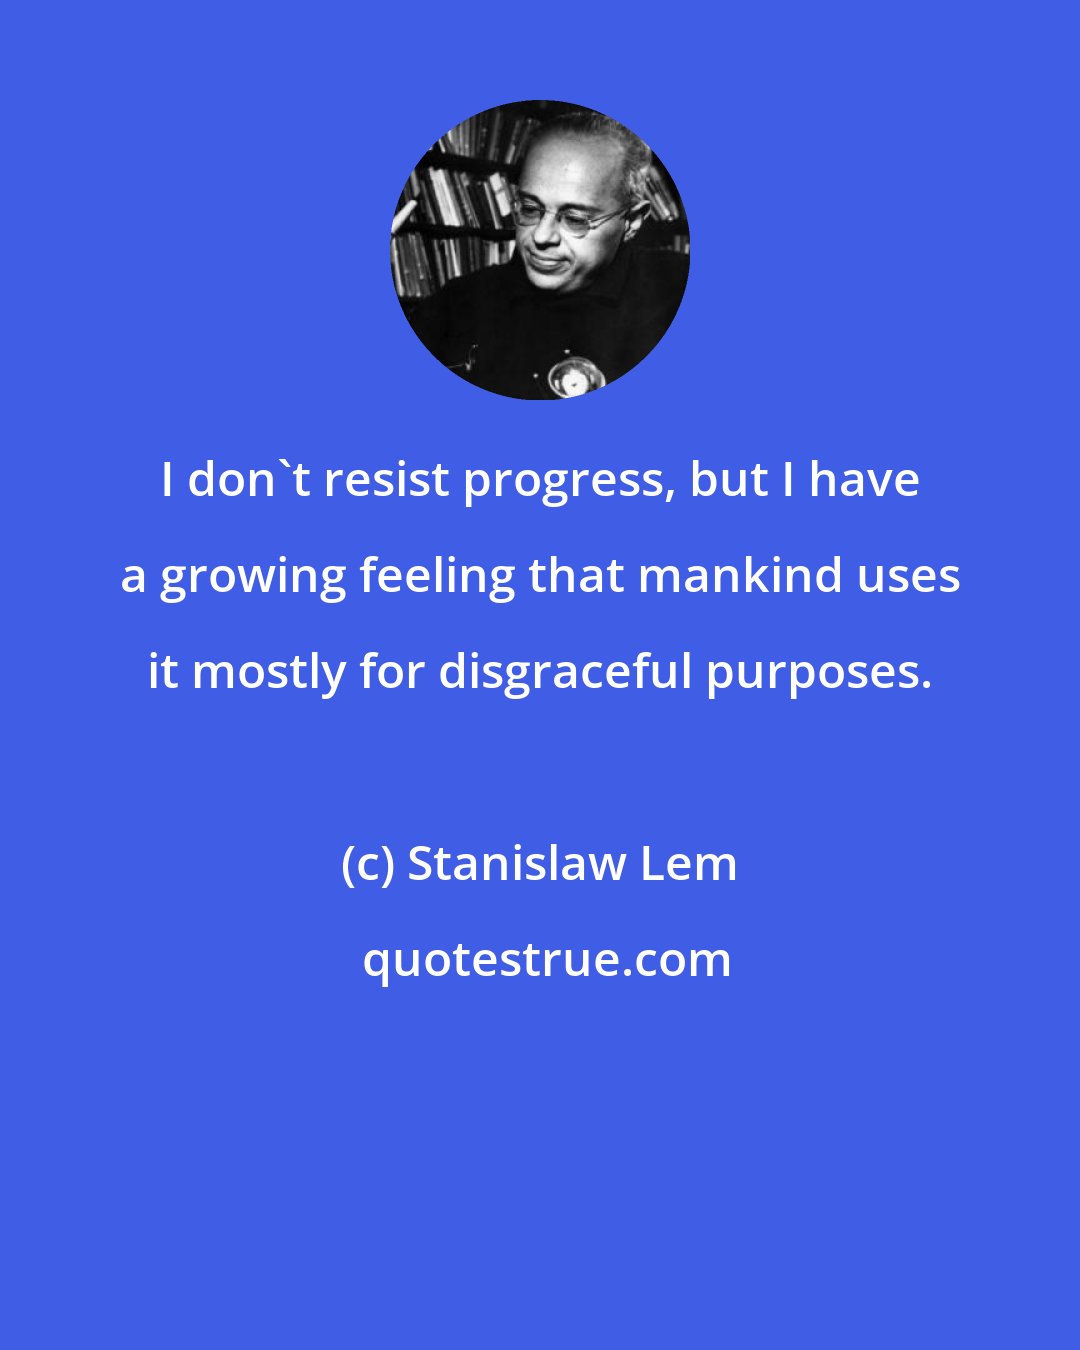 Stanislaw Lem: I don't resist progress, but I have a growing feeling that mankind uses it mostly for disgraceful purposes.